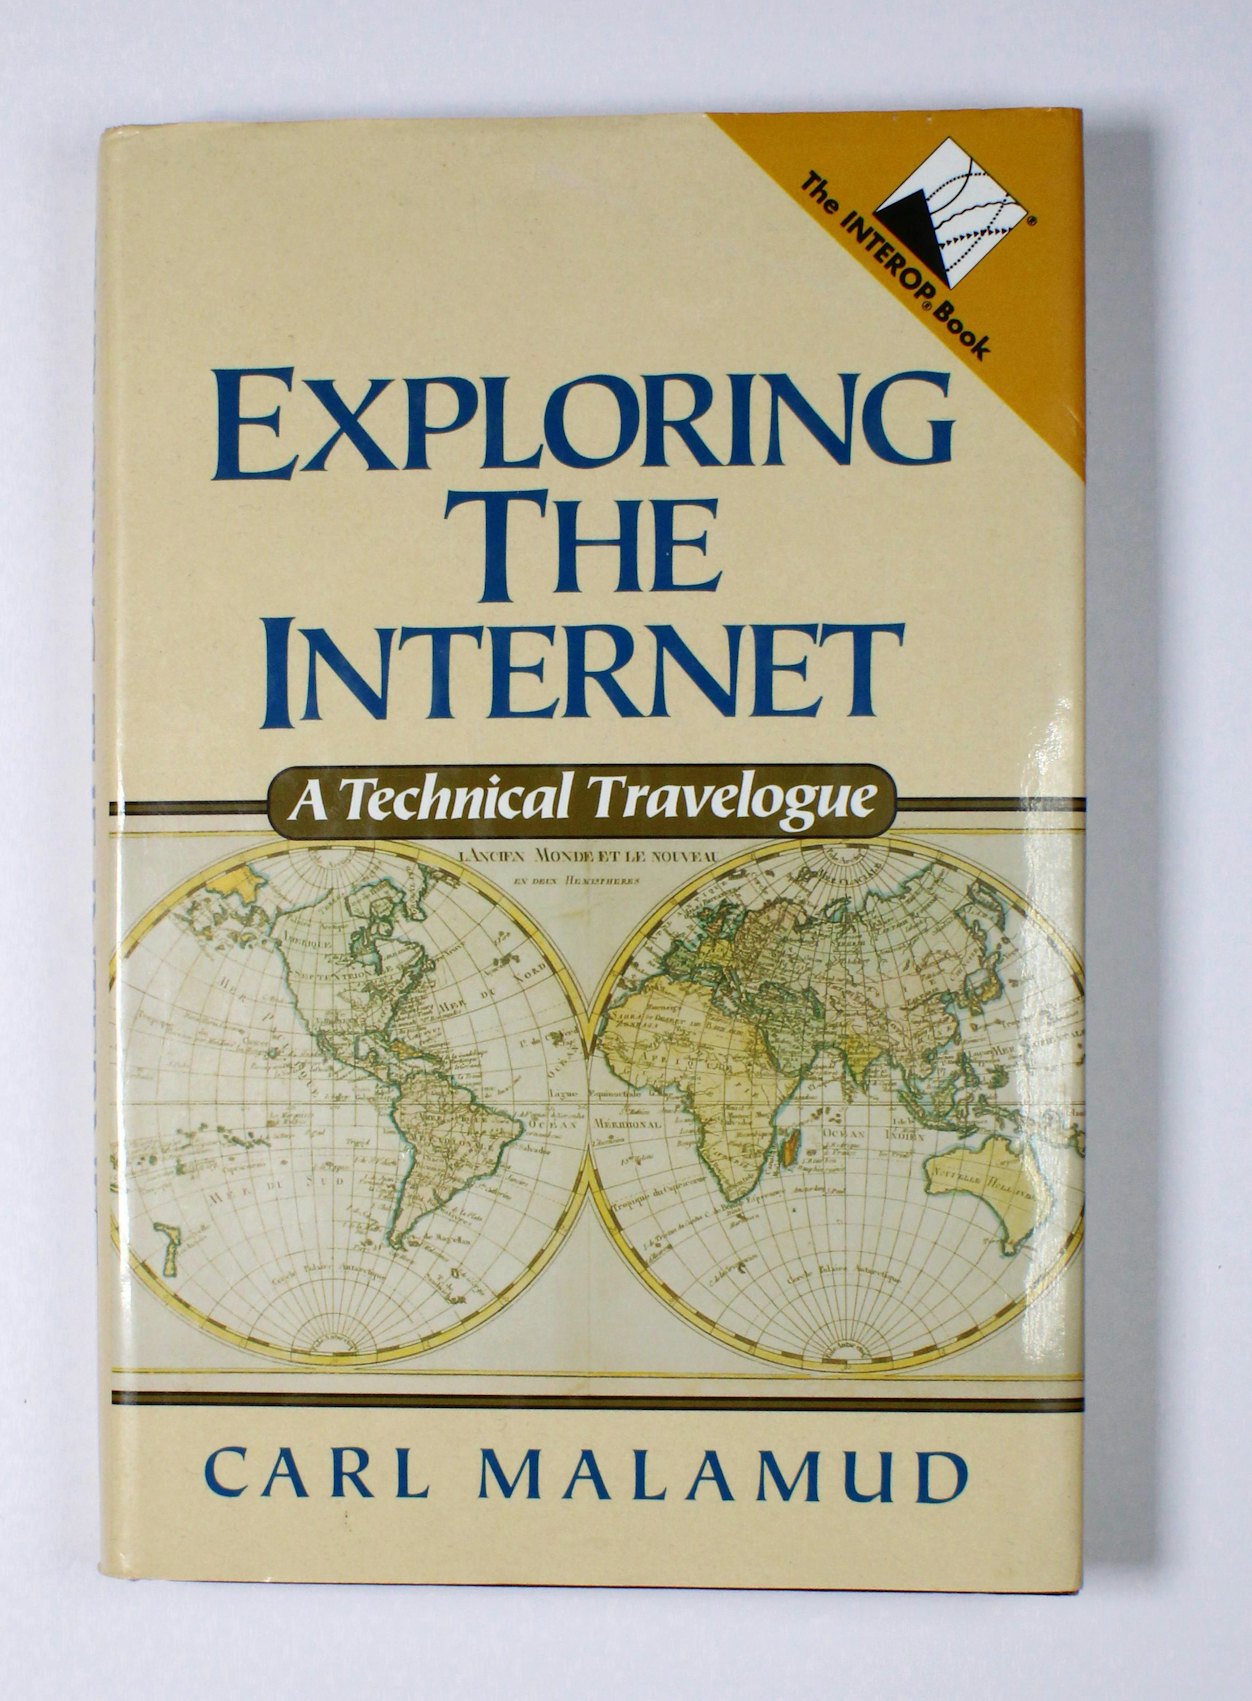 Exploring the Internet: A Technical Travelogue